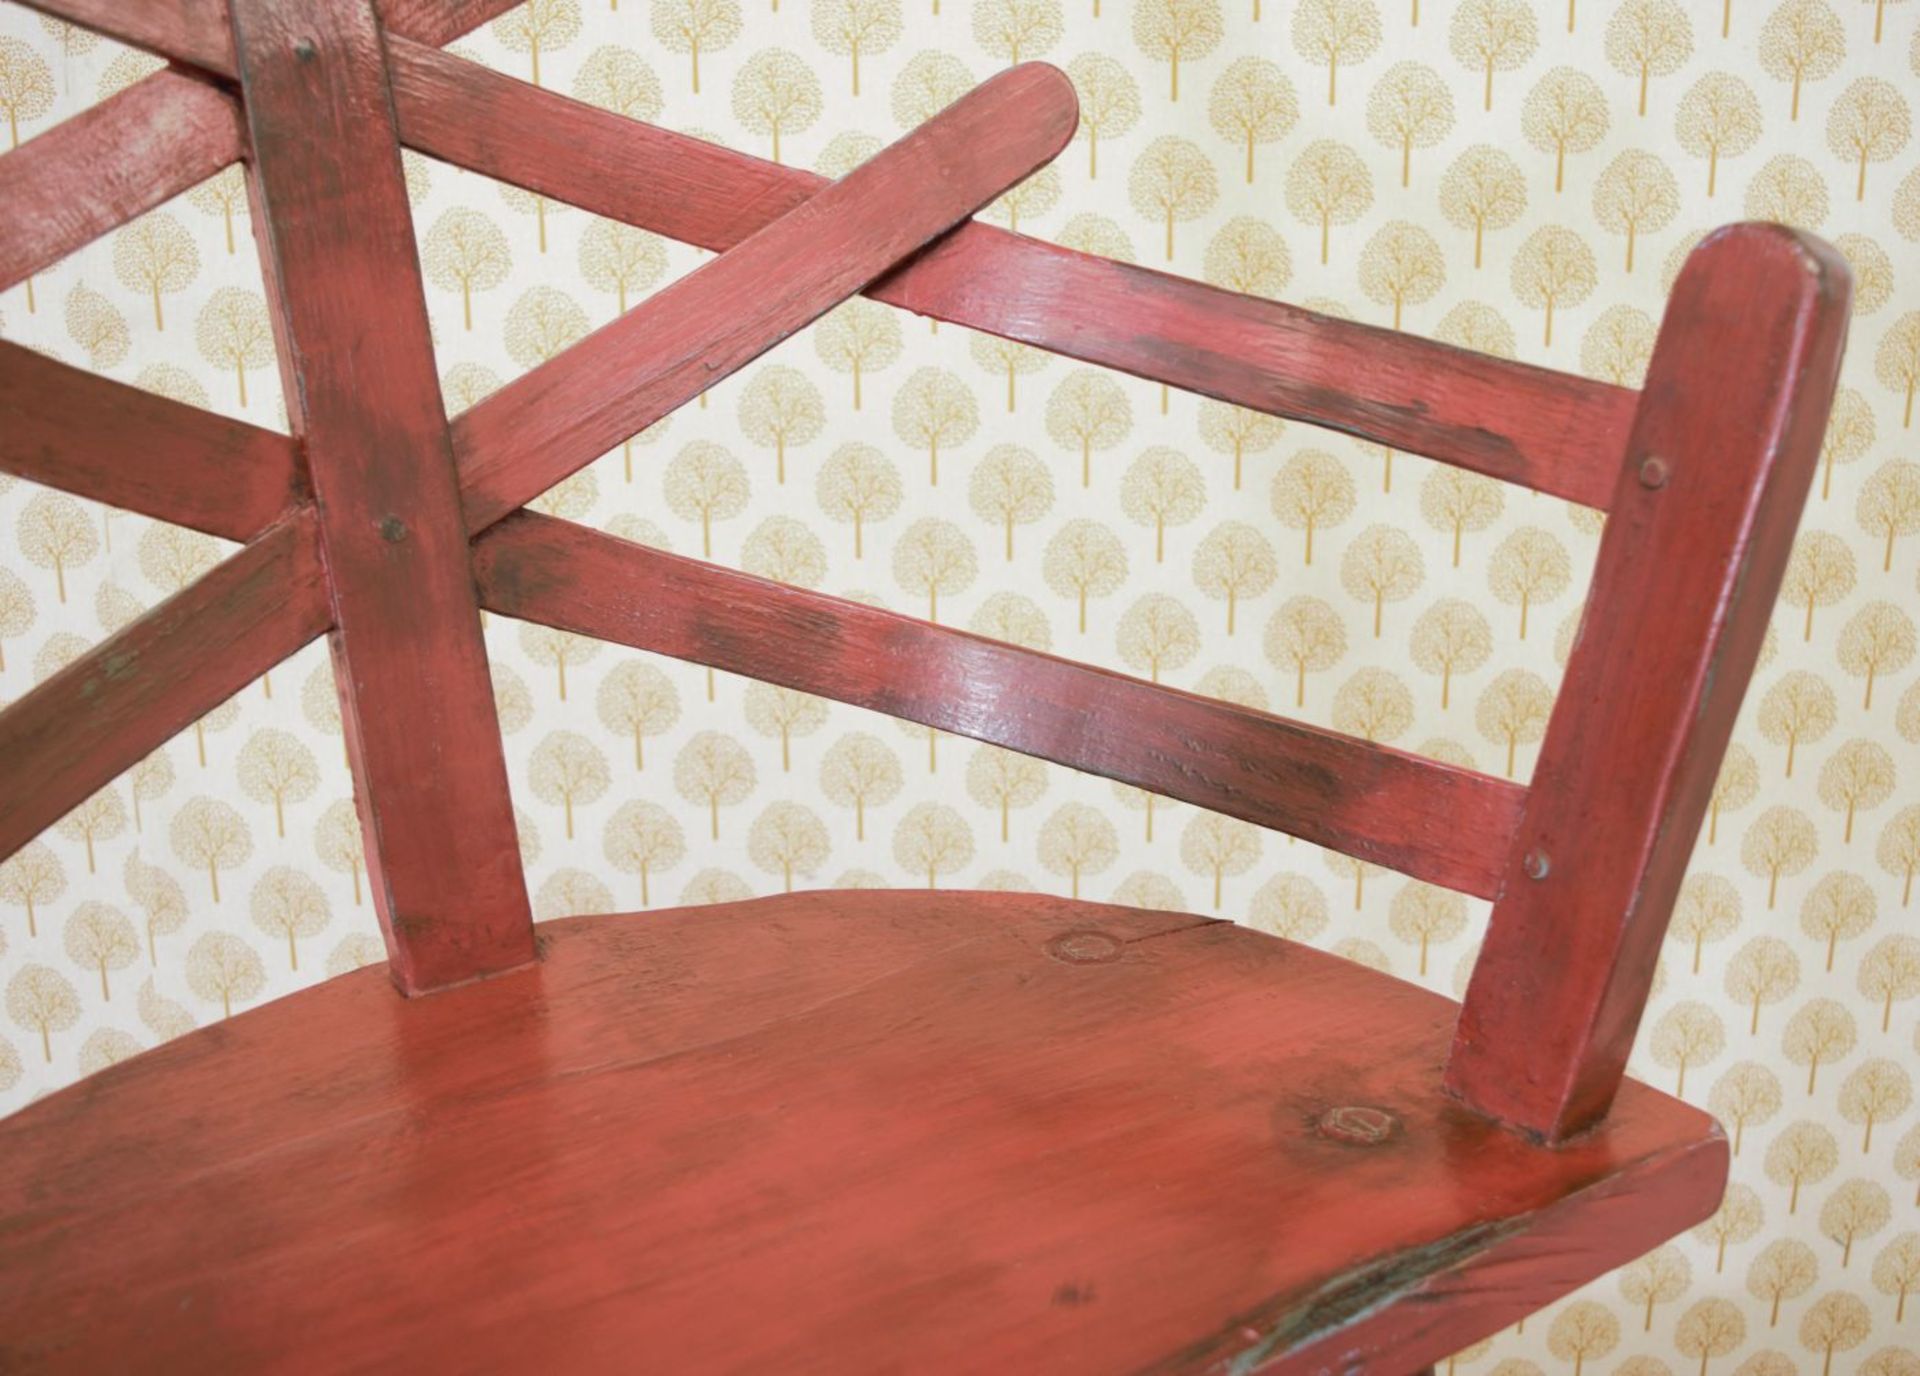 19TH-CENTURY ASH & ELM BOAT BUILDER'S CHAIR - Image 4 of 4